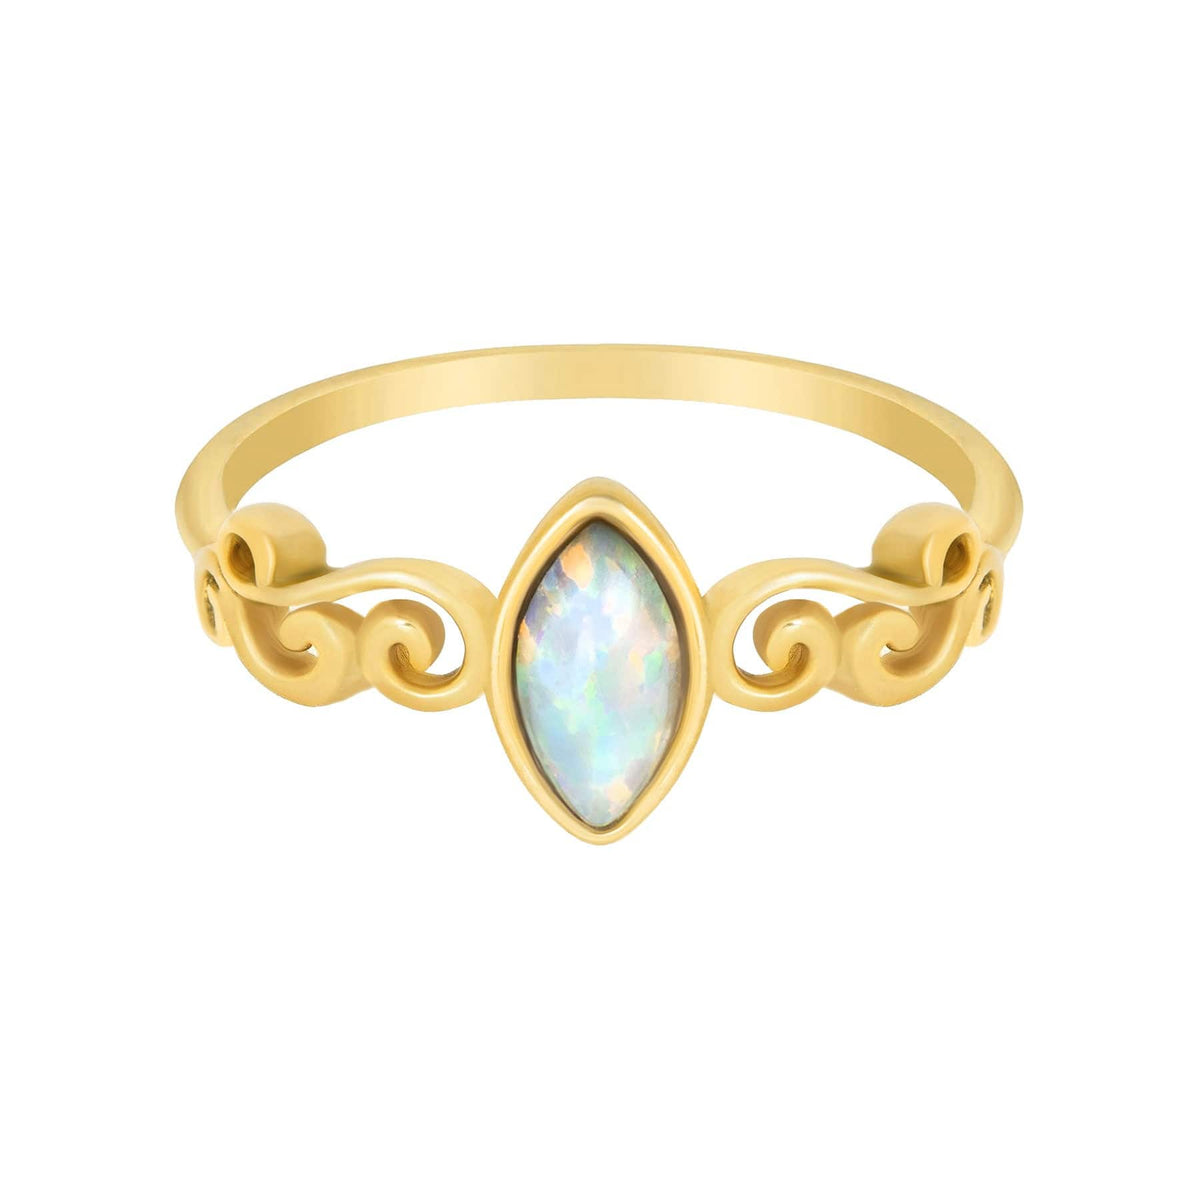 BohoMoon Stainless Steel Elodie Opal Ring Gold / US 6 / UK L / EUR 51 (small)